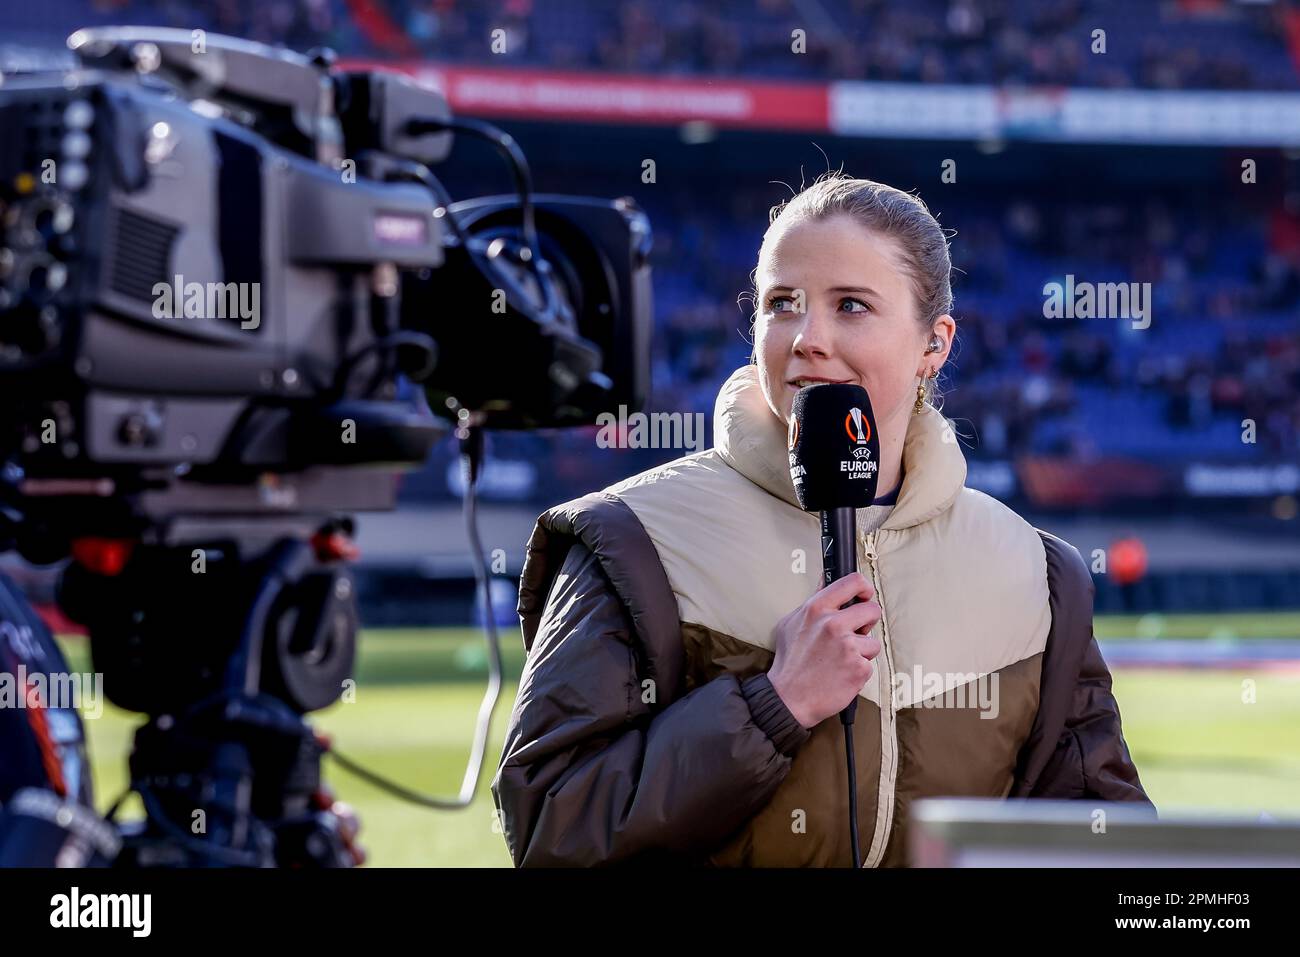 Stadion Feijenoord, Netherlands. 13th Apr, 2023. STADION FEIJENOORD, NETHERLANDS - APRIL 13: Noa Vahle presenter of RTL 7 and Johan Boskamp analist of RTL 7 taking a selfie after the Quarterfinal First Leg - UEFA Europa League match between Feyenoord and AS Roma at the Rotterdam on April 13, 2023 in Stadion Feijenoord, Netherlands (Photo by Marcel ter Bals/Orange Pictures) Credit: Orange Pics BV/Alamy Live News Stock Photo